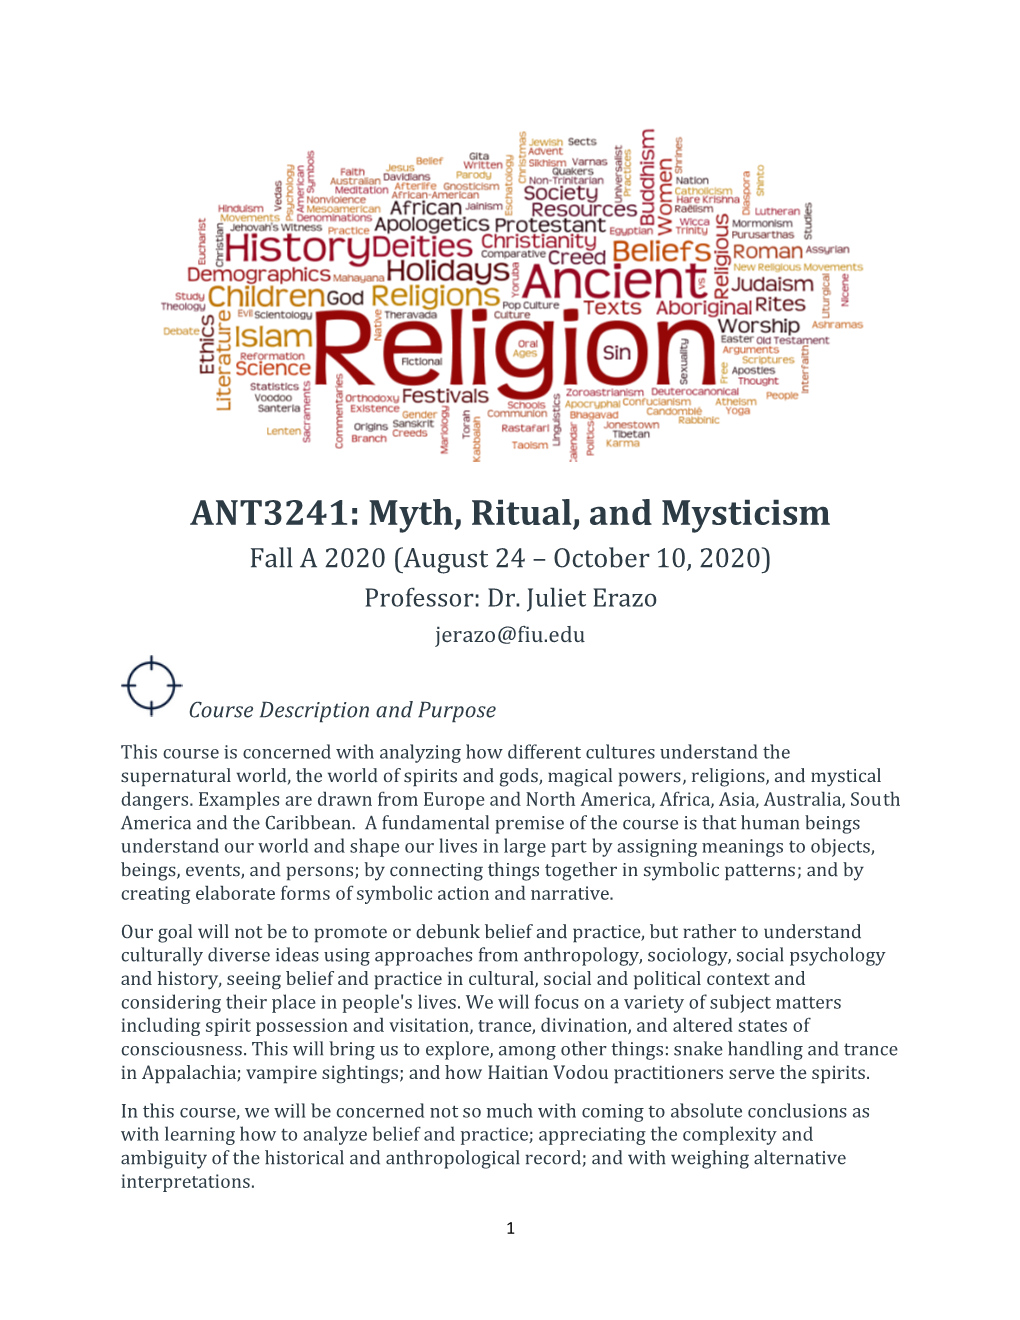 ANT3241: Myth, Ritual, and Mysticism Fall a 2020 (August 24 – October 10, 2020) Professor: Dr